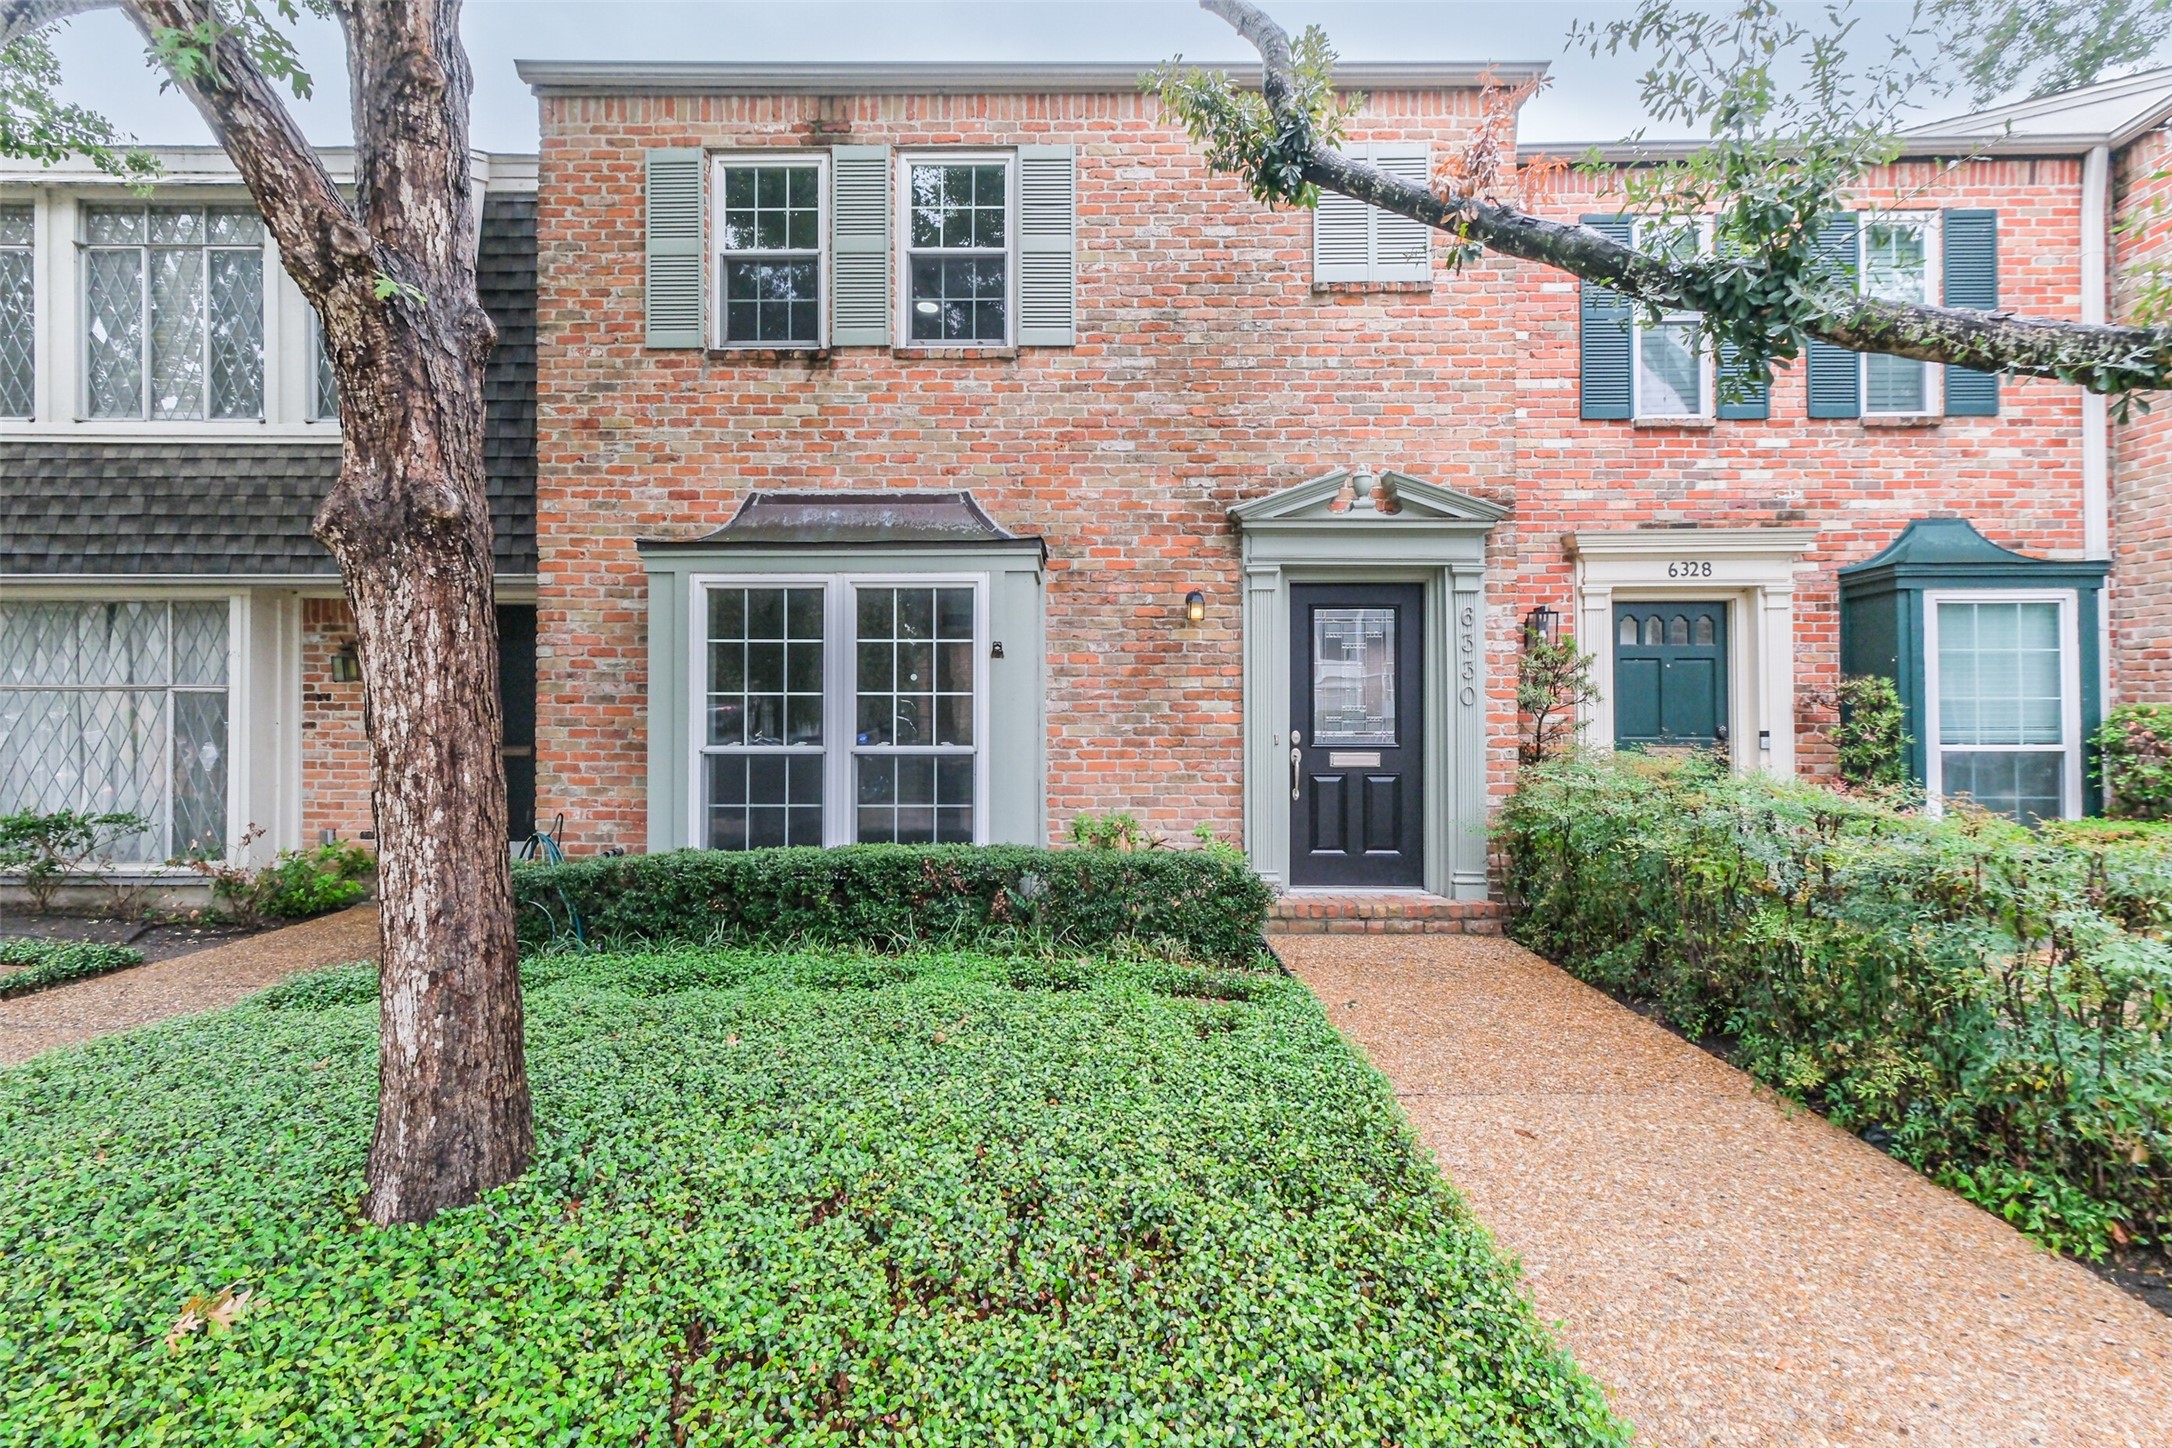 Stunning remodel with 2 bedrooms, 1.5 baths located in the prime location of Briargrove Drive Townhomes. Conveniently located to the Galleria, Memorial City and the Westchase area.